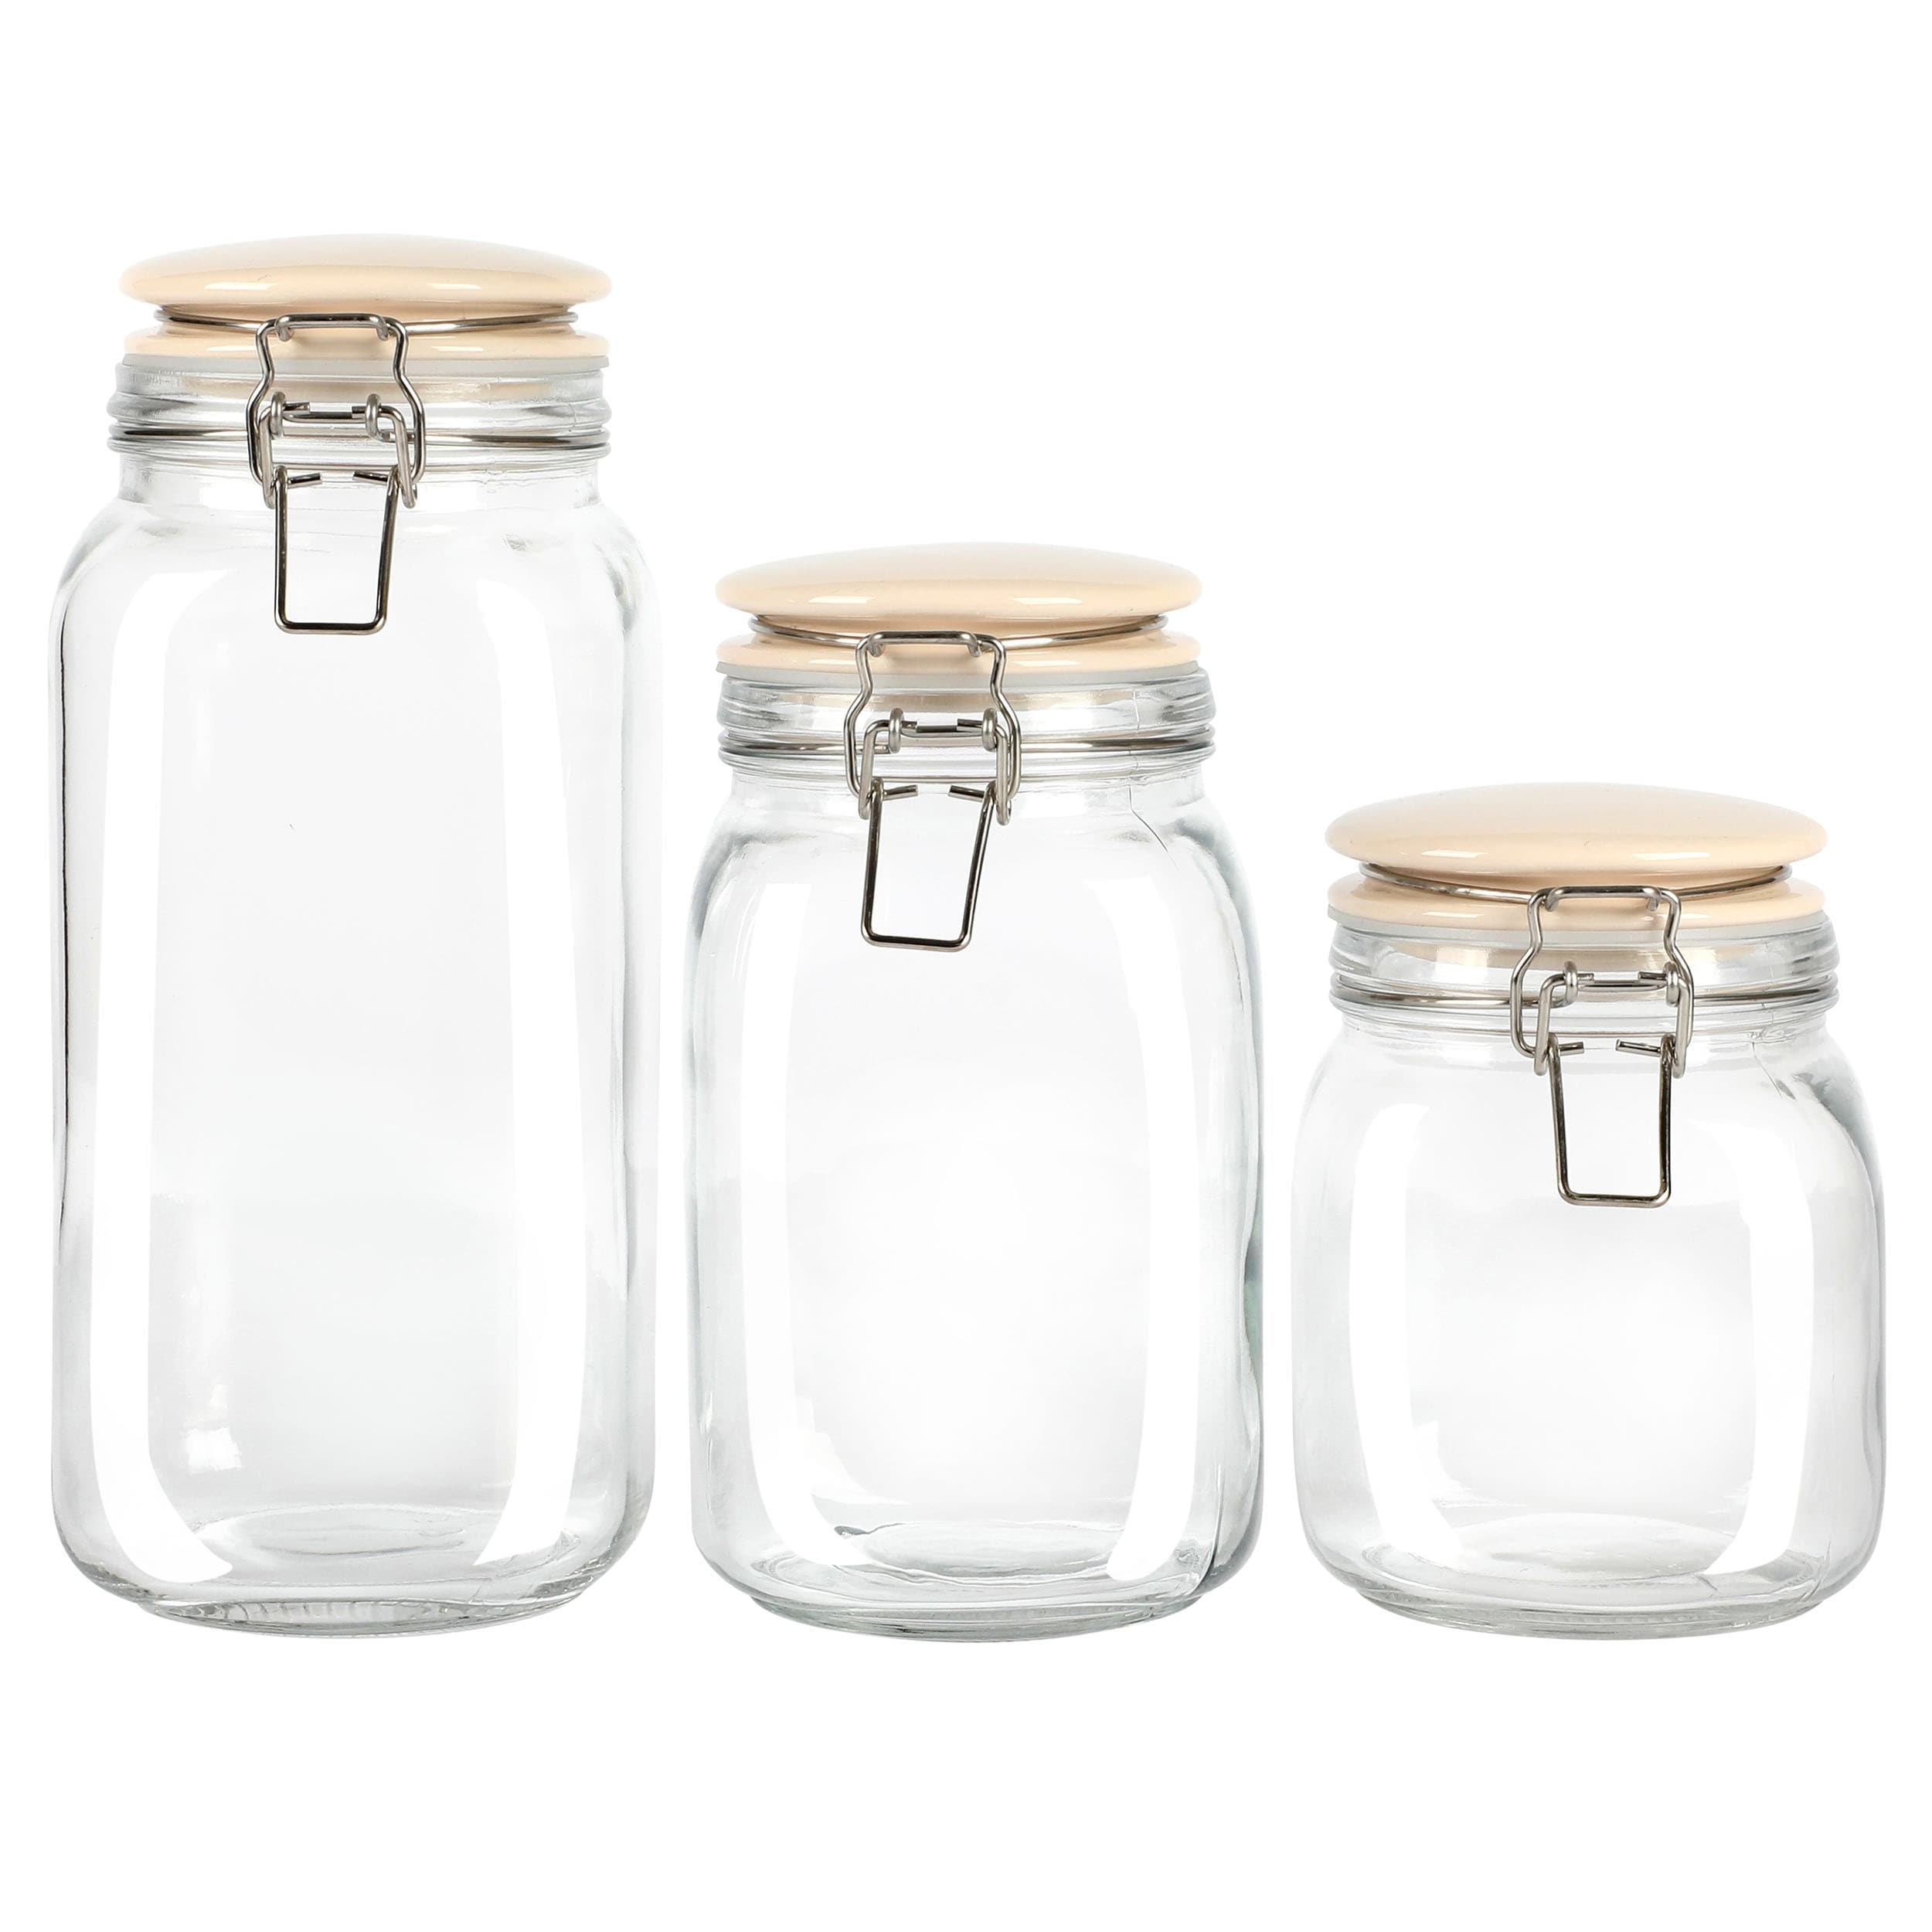 https://ak1.ostkcdn.com/images/products/is/images/direct/b25a437515422afc73875e15a16dddf7ac7b1fd5/Martha-Stewart-Rindleton-3-Piece-Glass-Canister-Set-in-Off-White.jpg